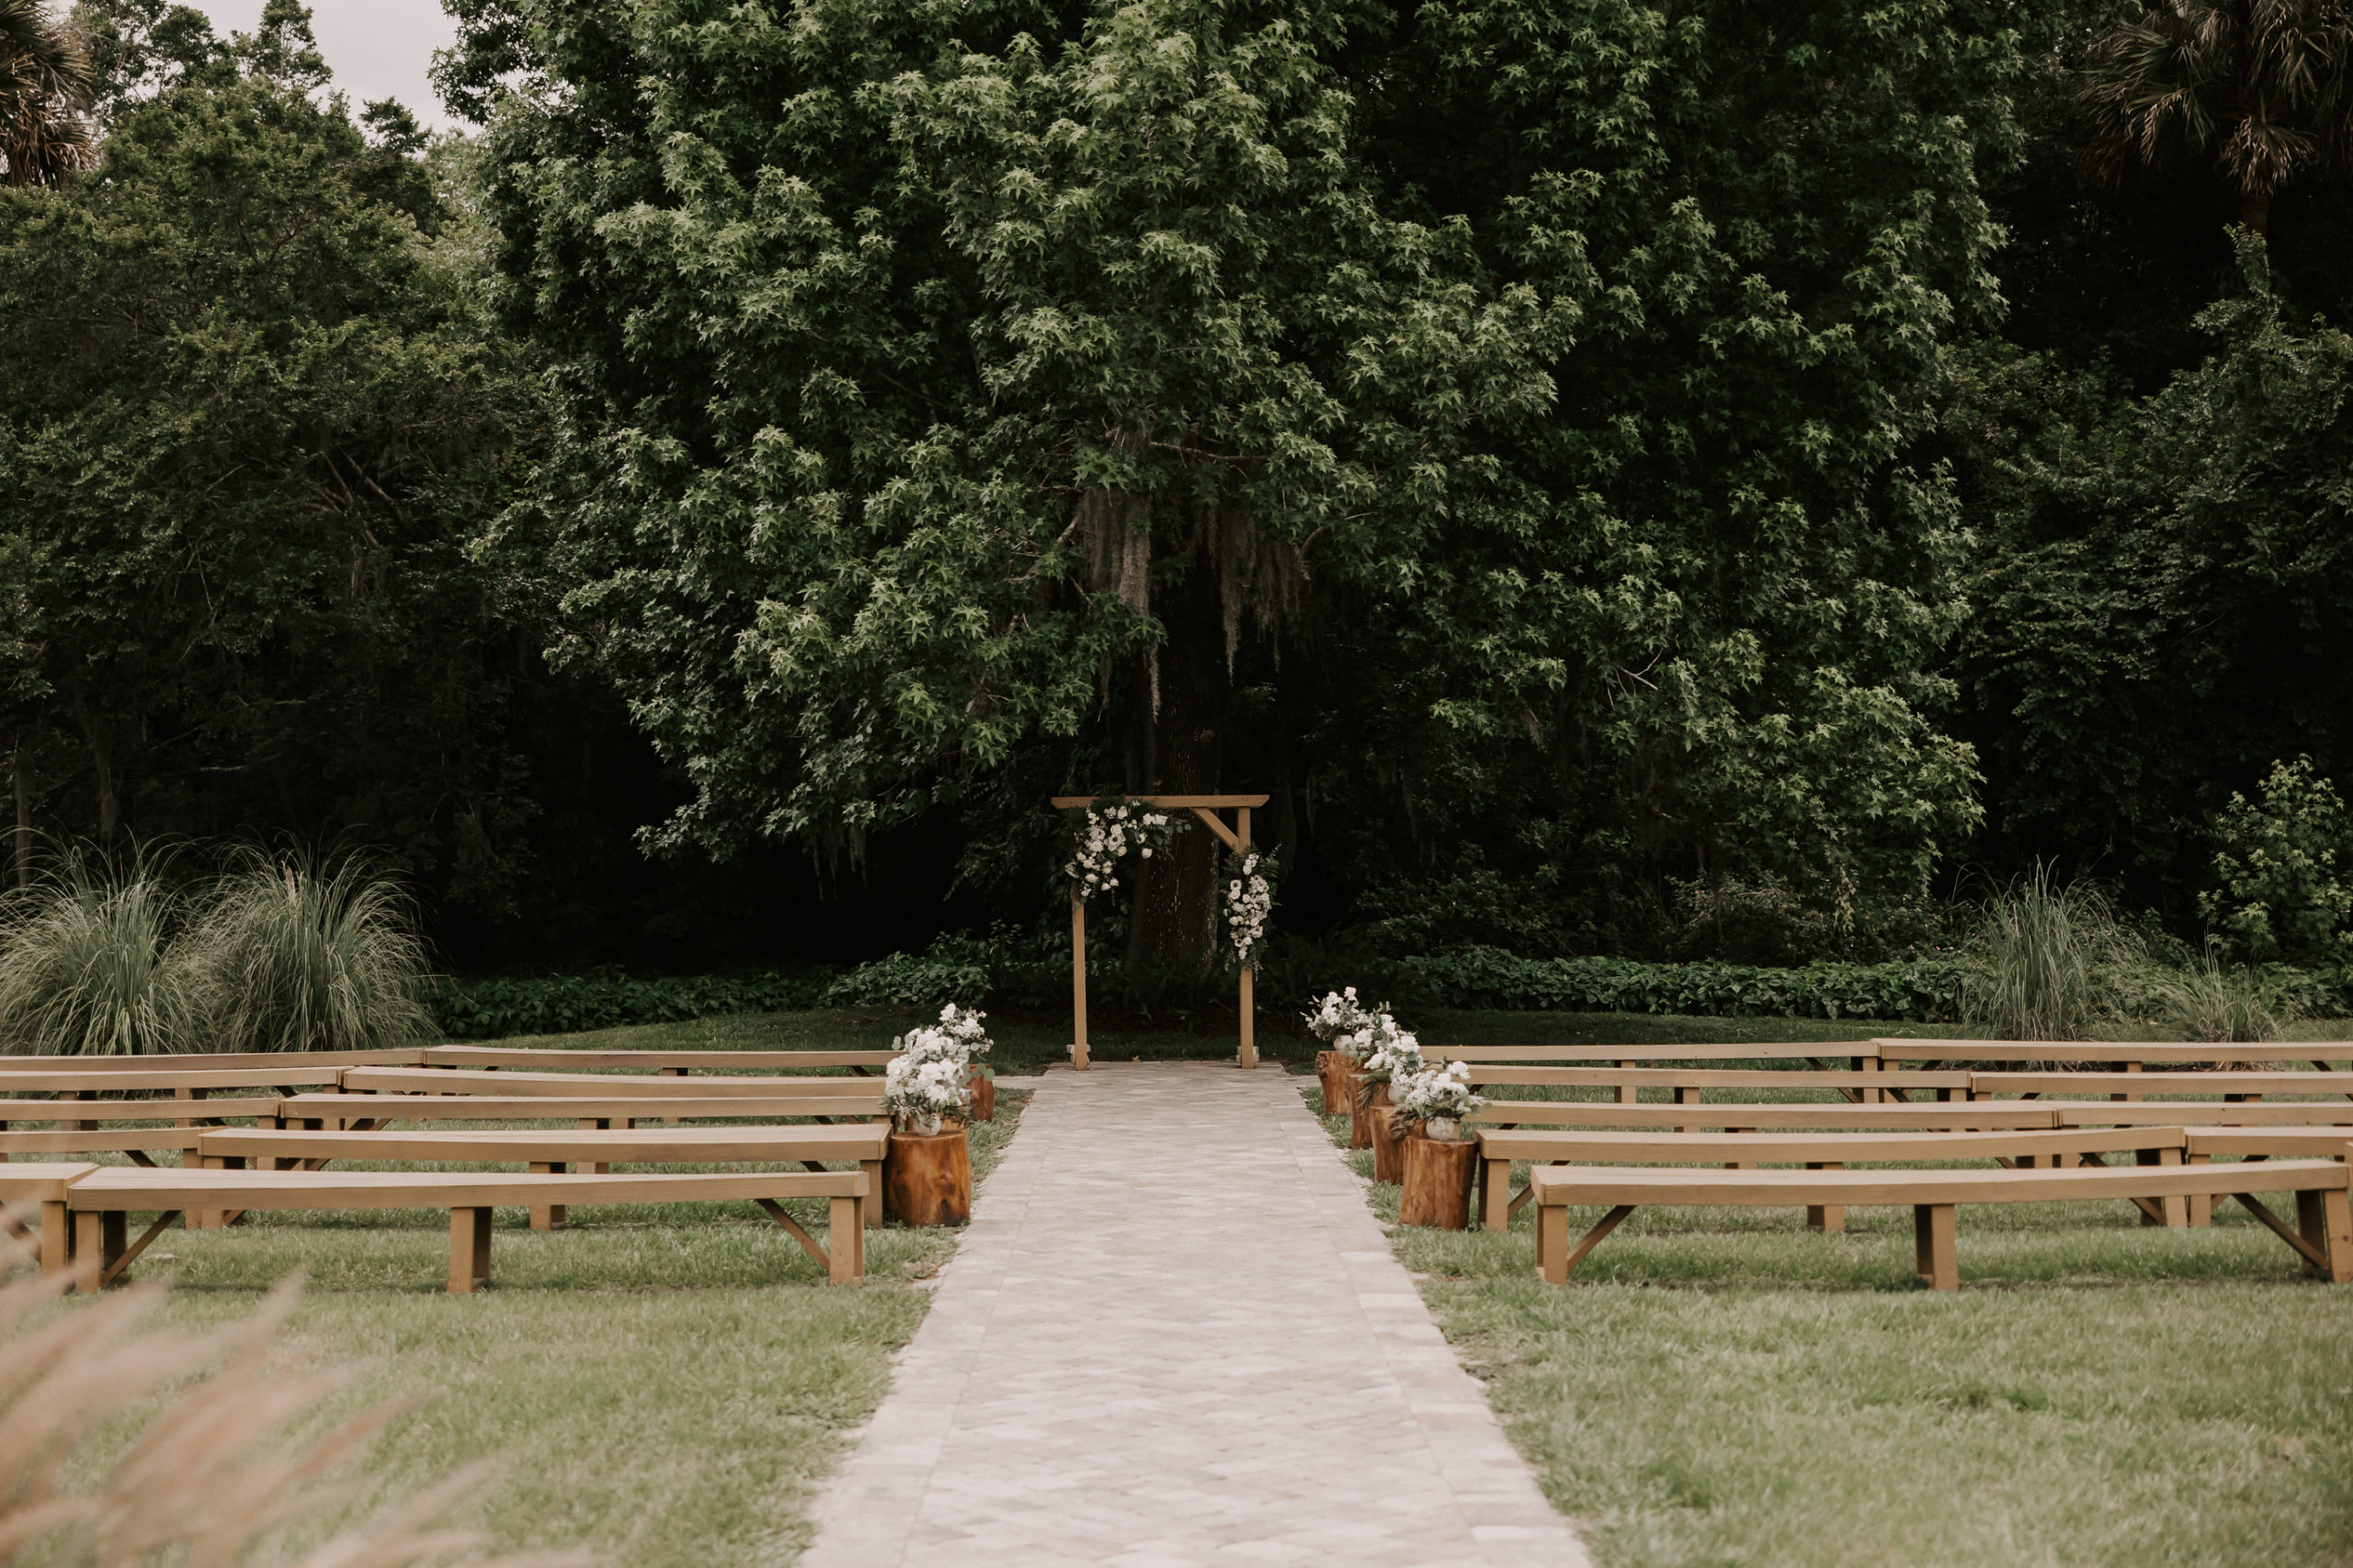 The already beautiful surroundings required very little extra decor so those white flowers enrobing their sleek ceremony arch couldn’t have been more perfect.